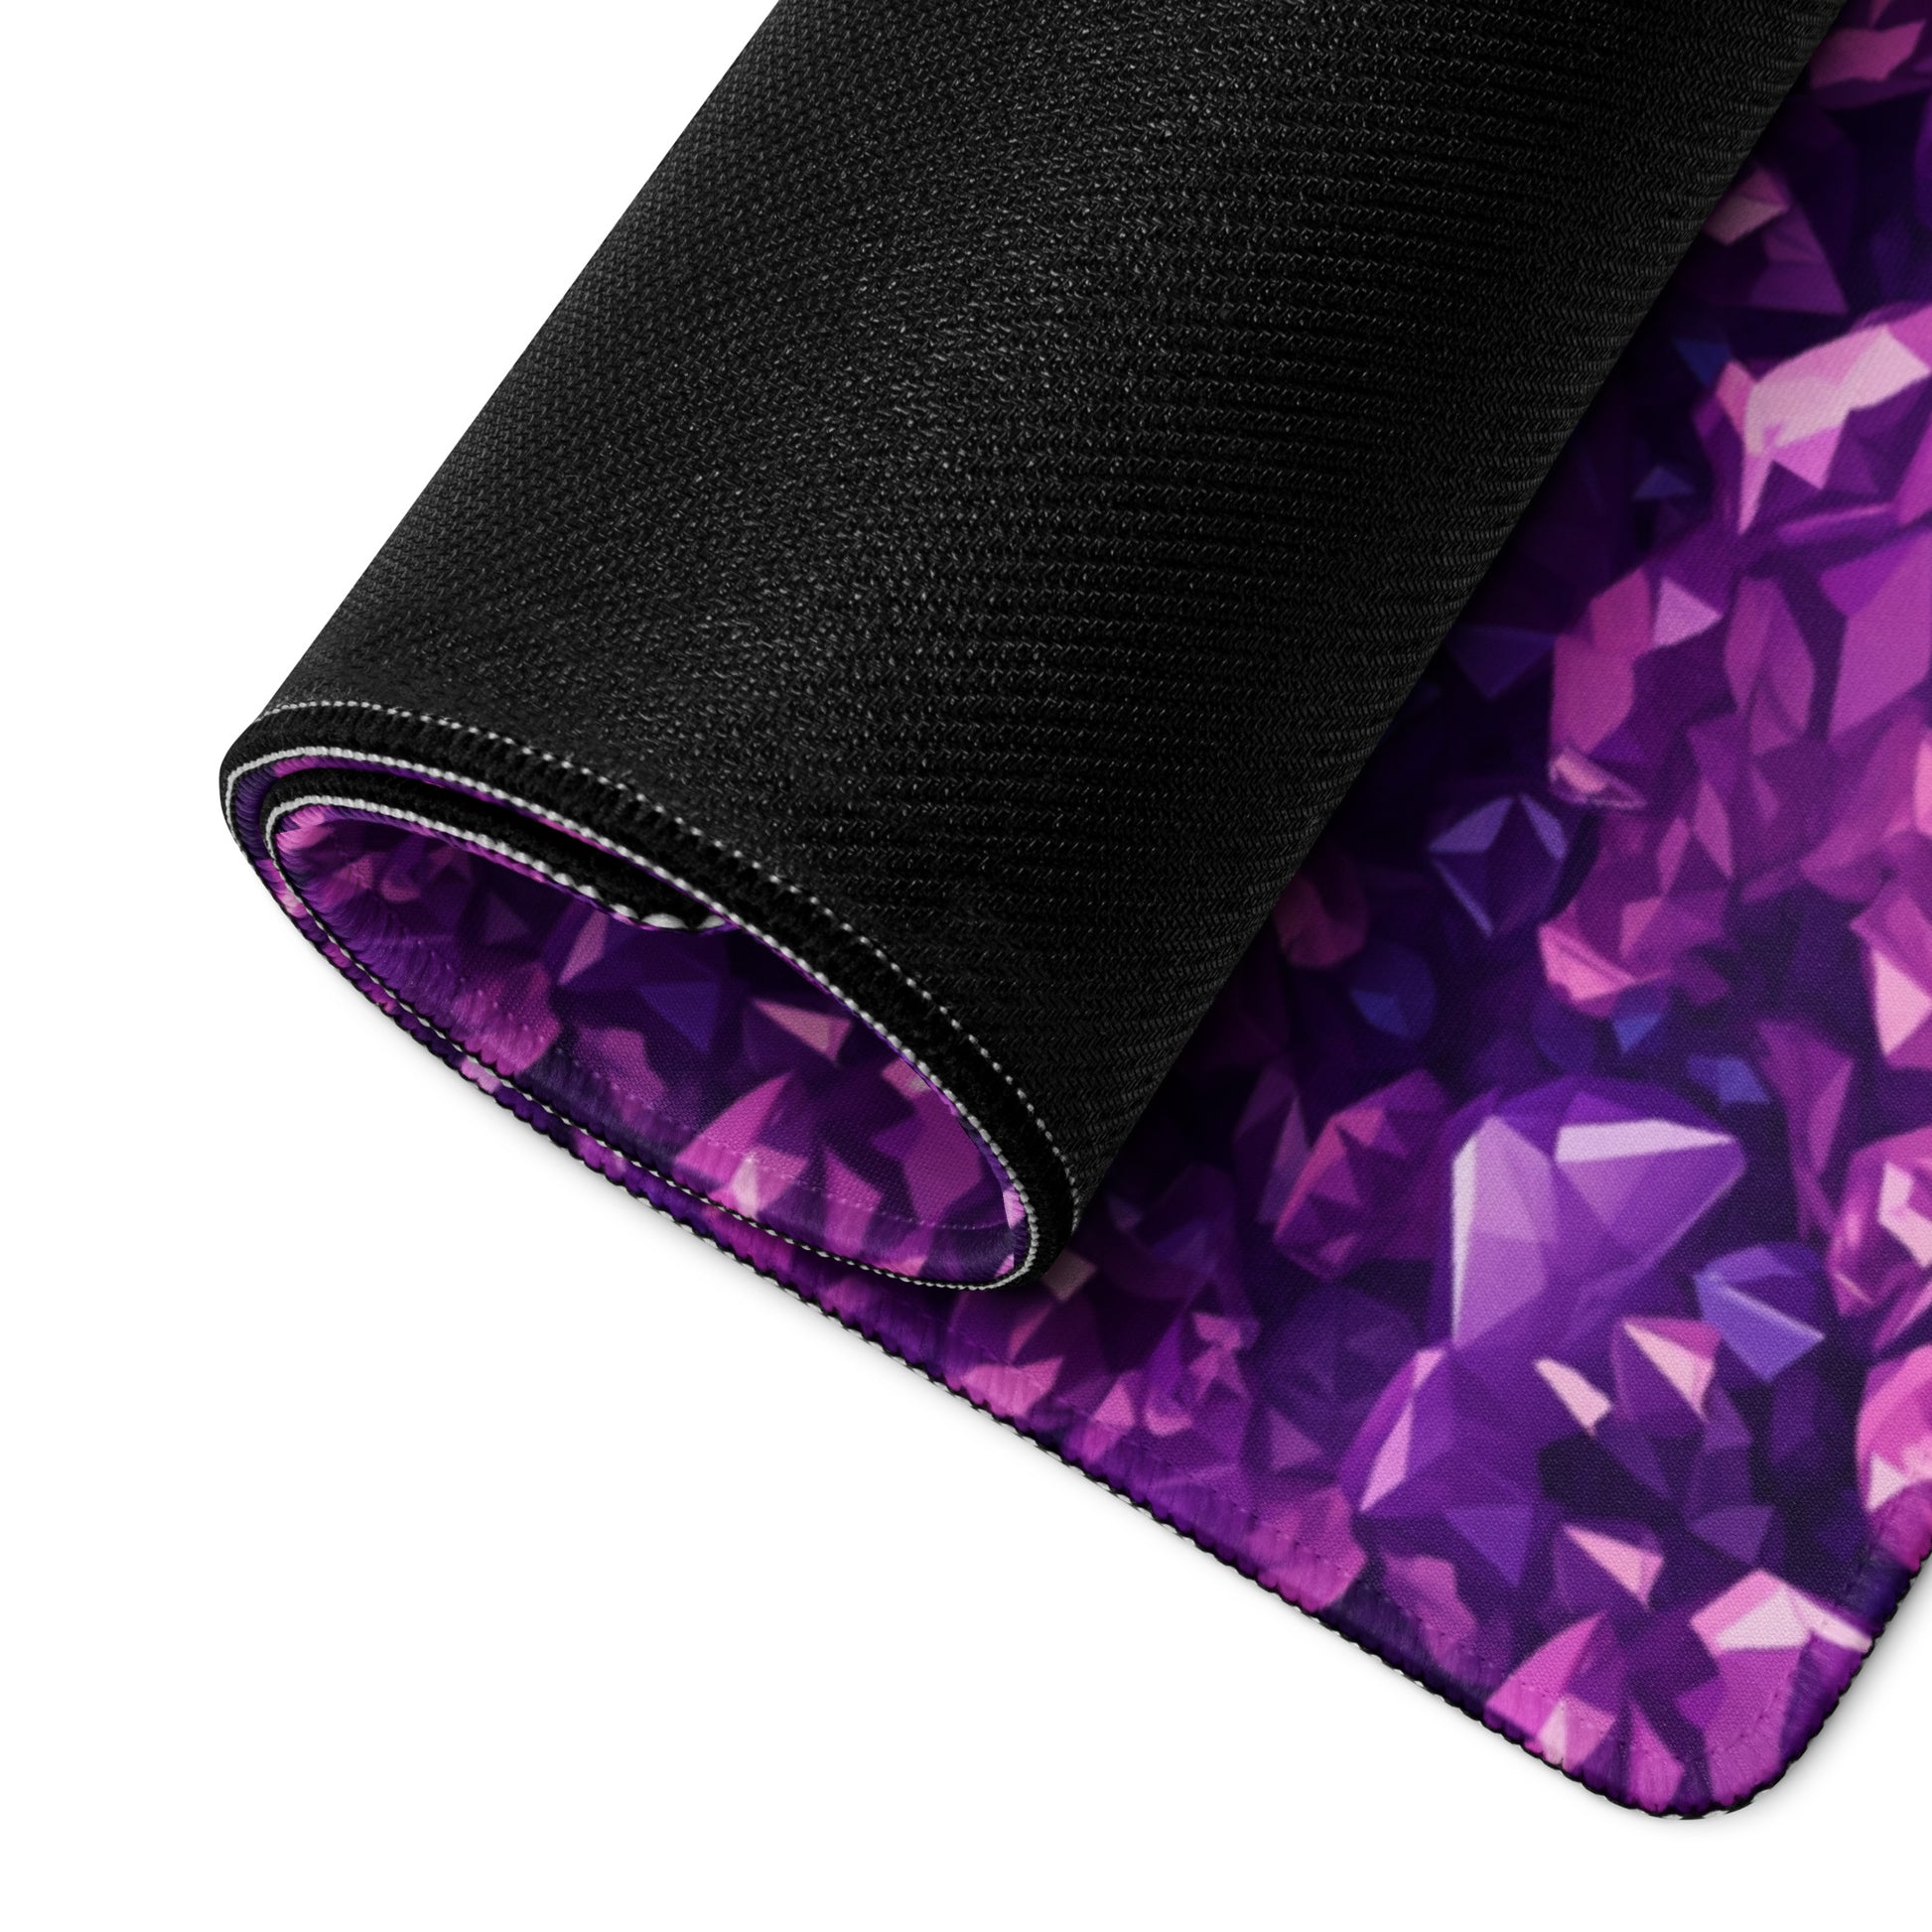 A purple crystal gaming desk pad rolled up.